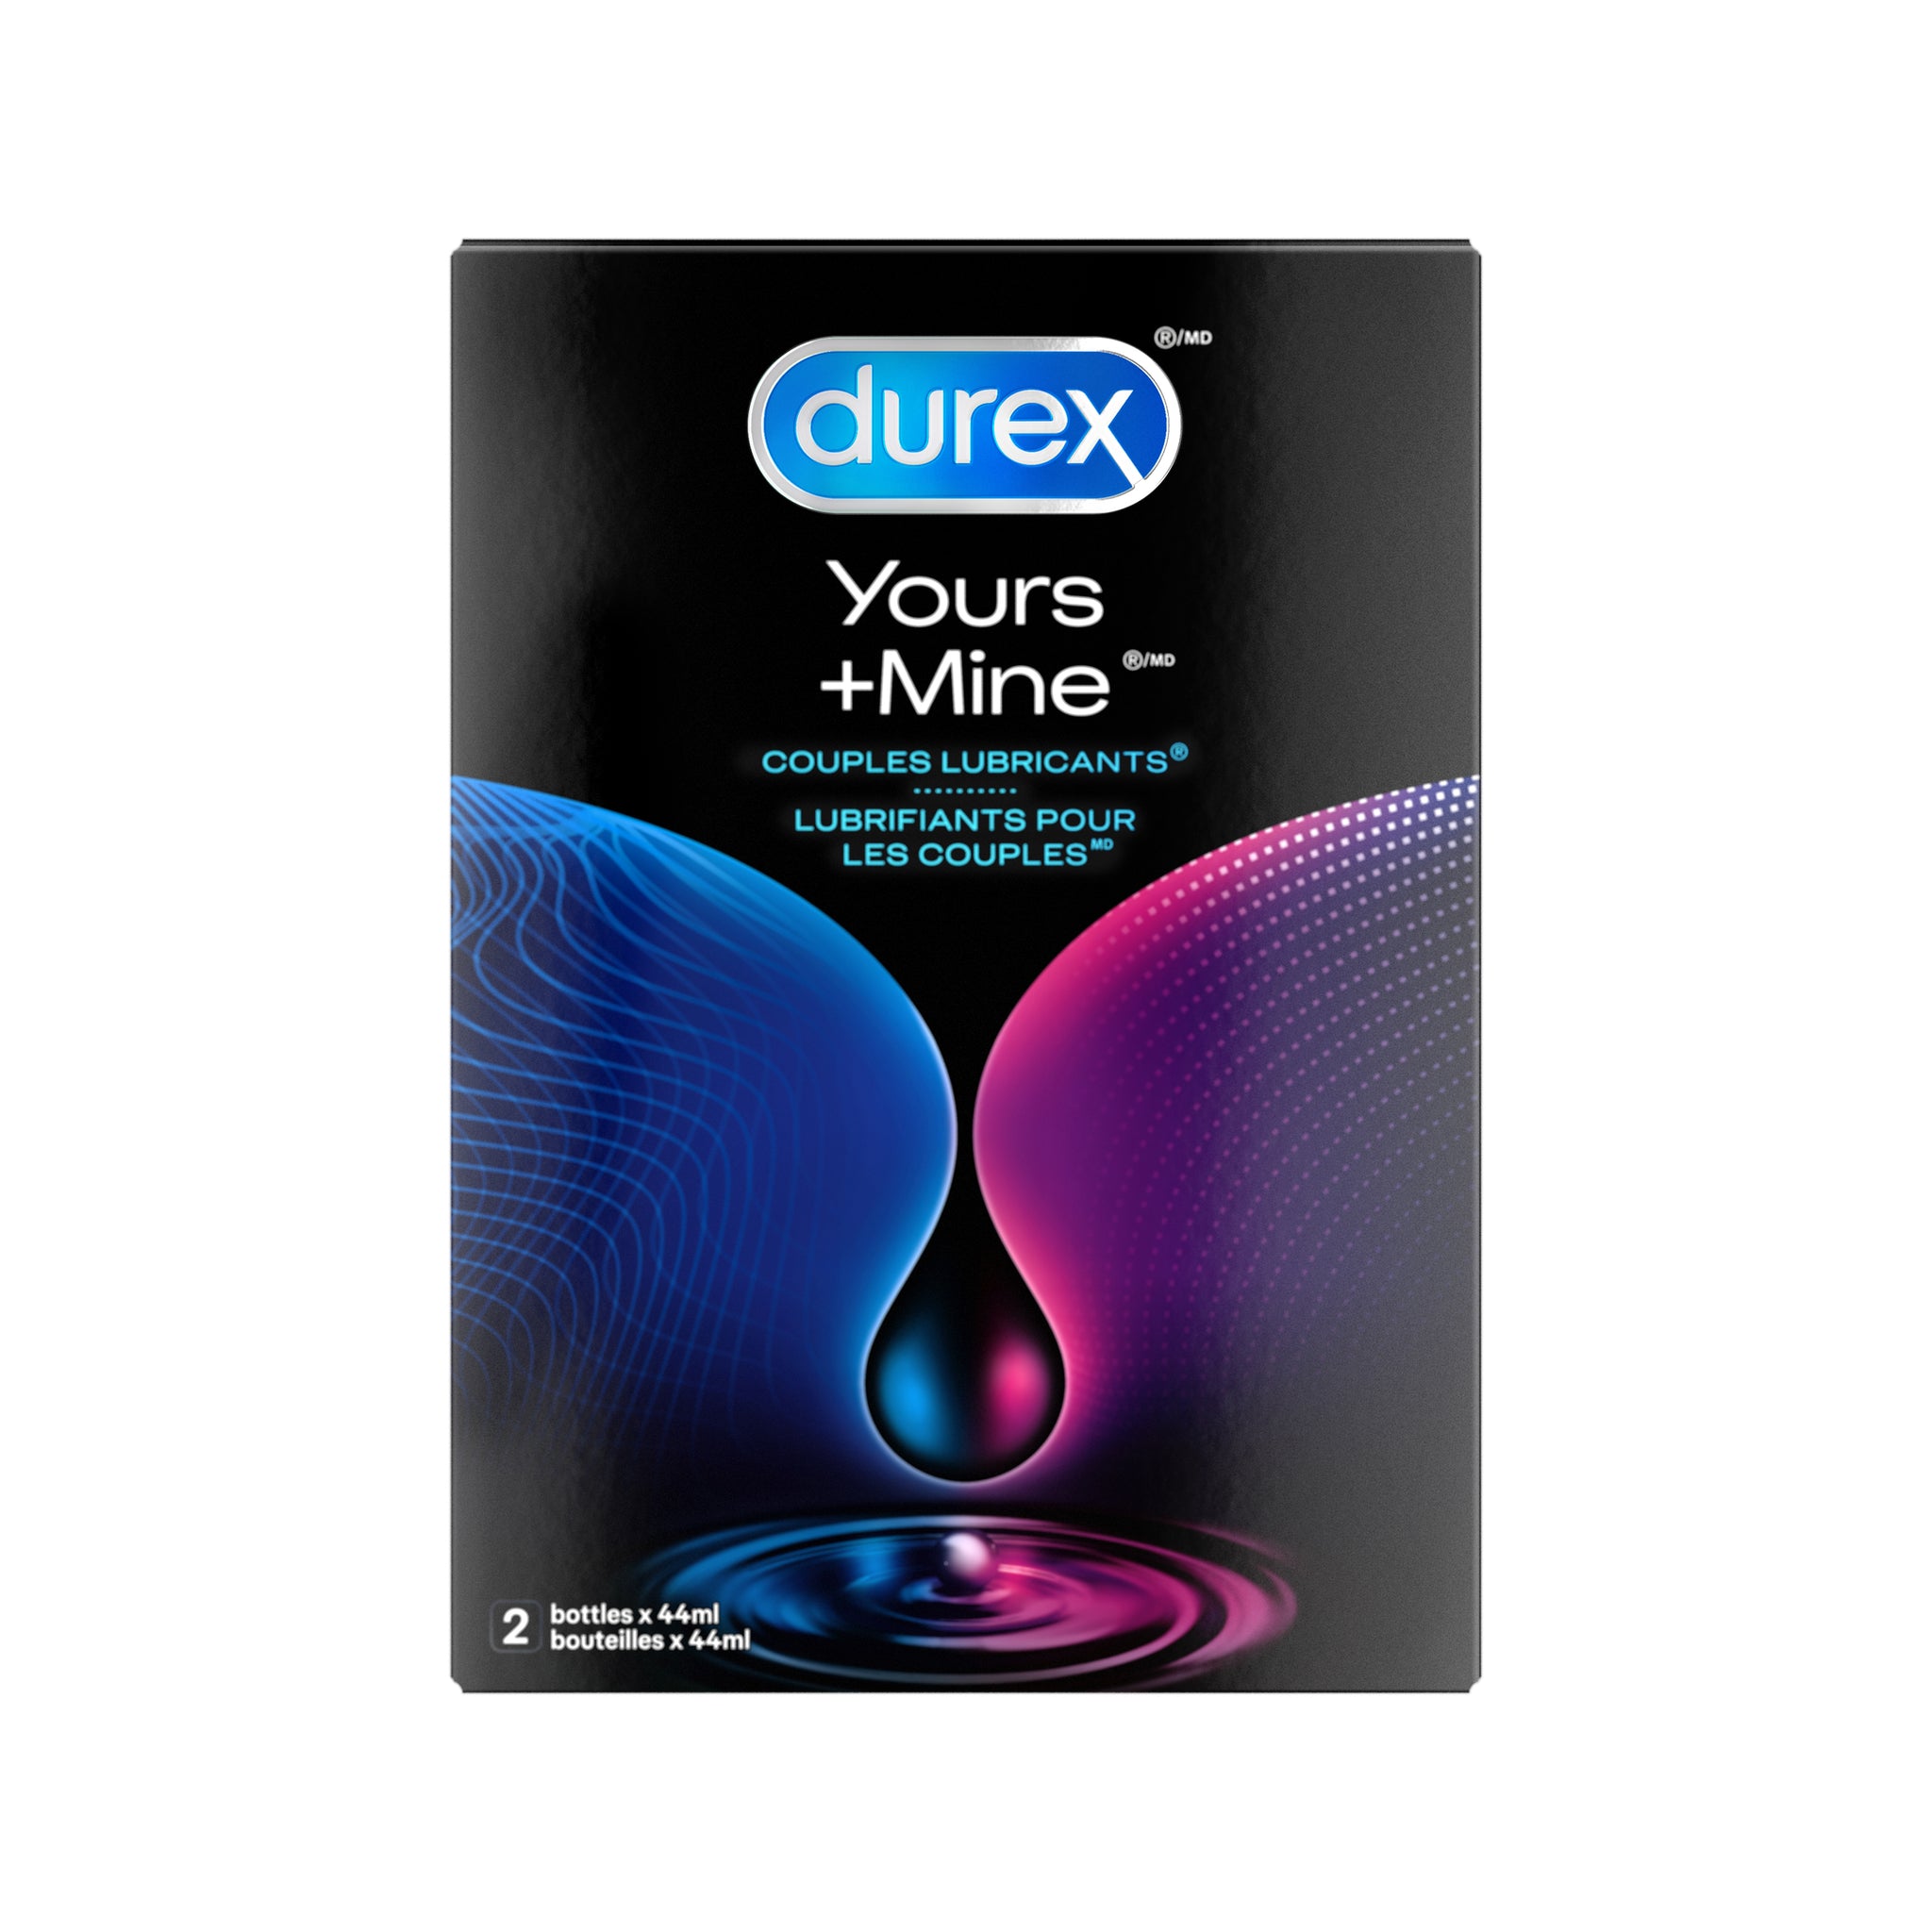 packshot of Packaged Durex Yours + Mine Couples Lubricants